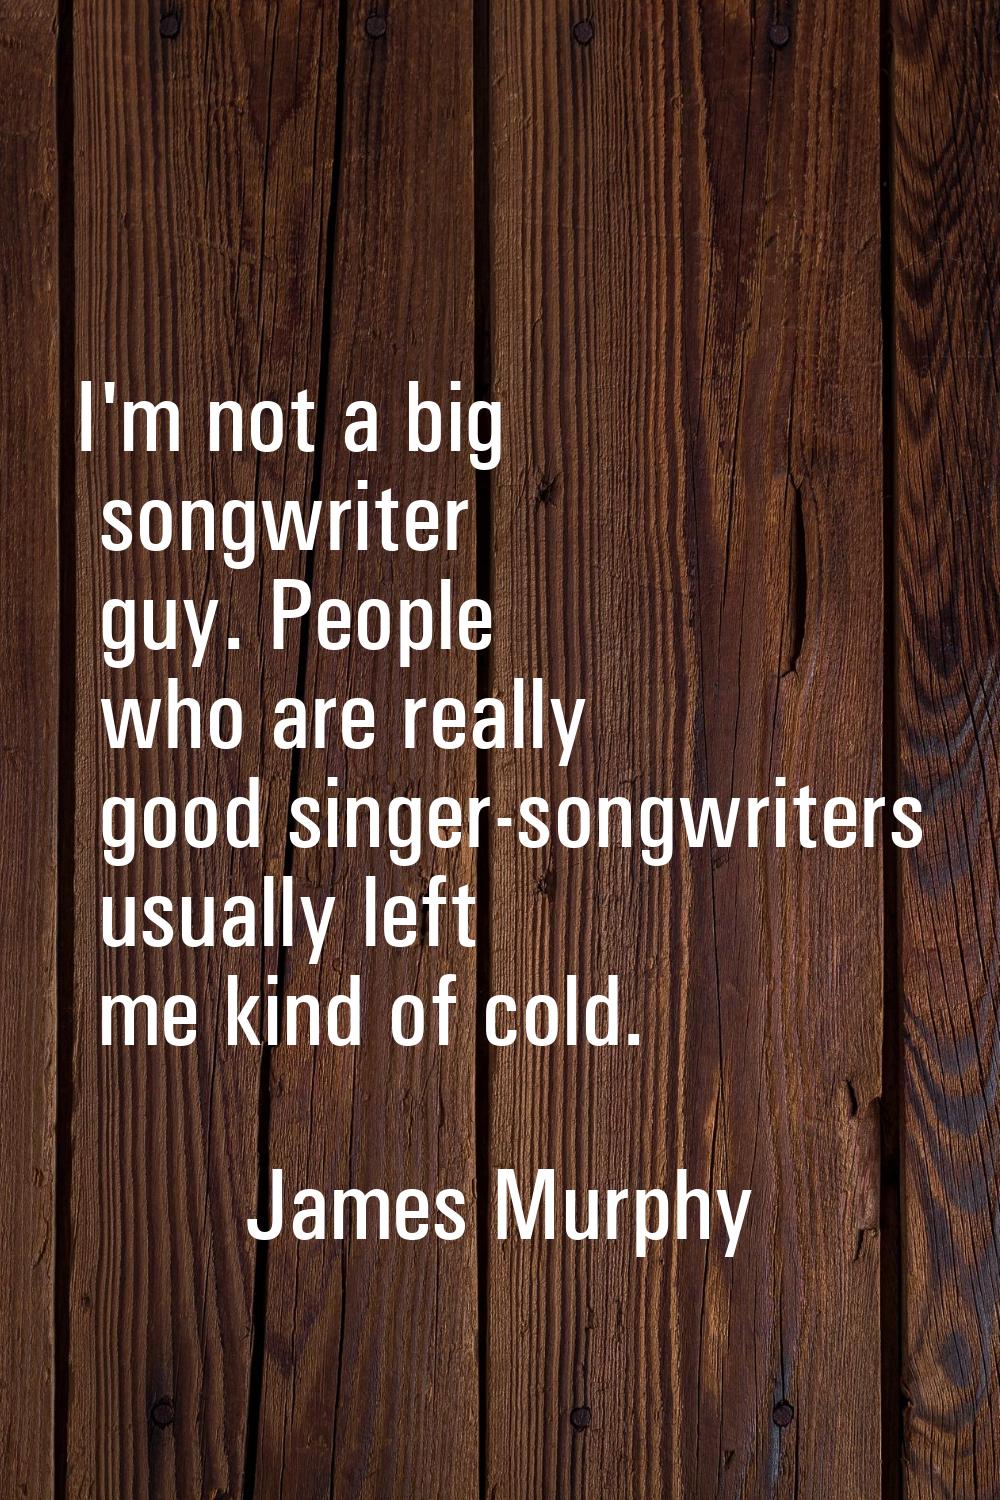 I'm not a big songwriter guy. People who are really good singer-songwriters usually left me kind of